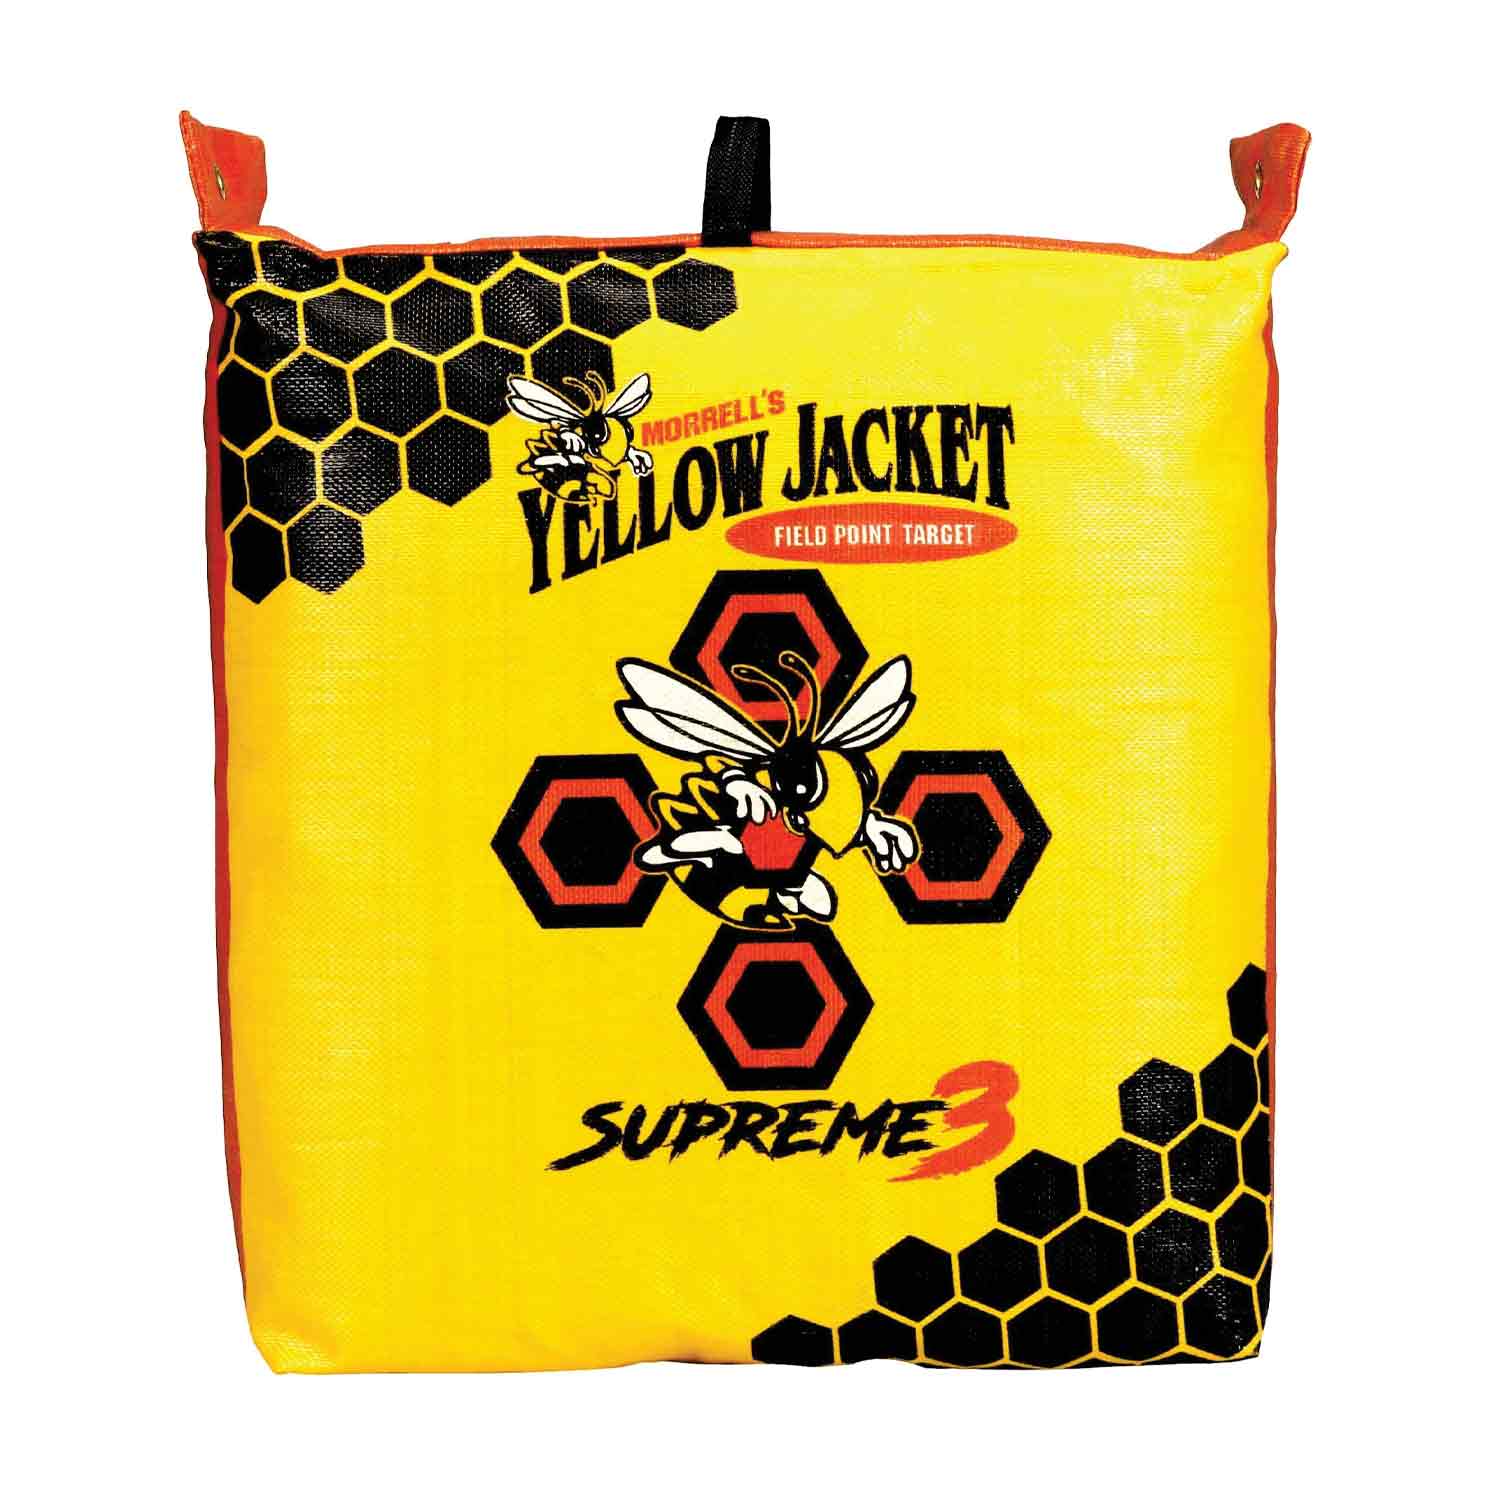 Morrell Yellow Jacket Supreme 3 Field Point Target